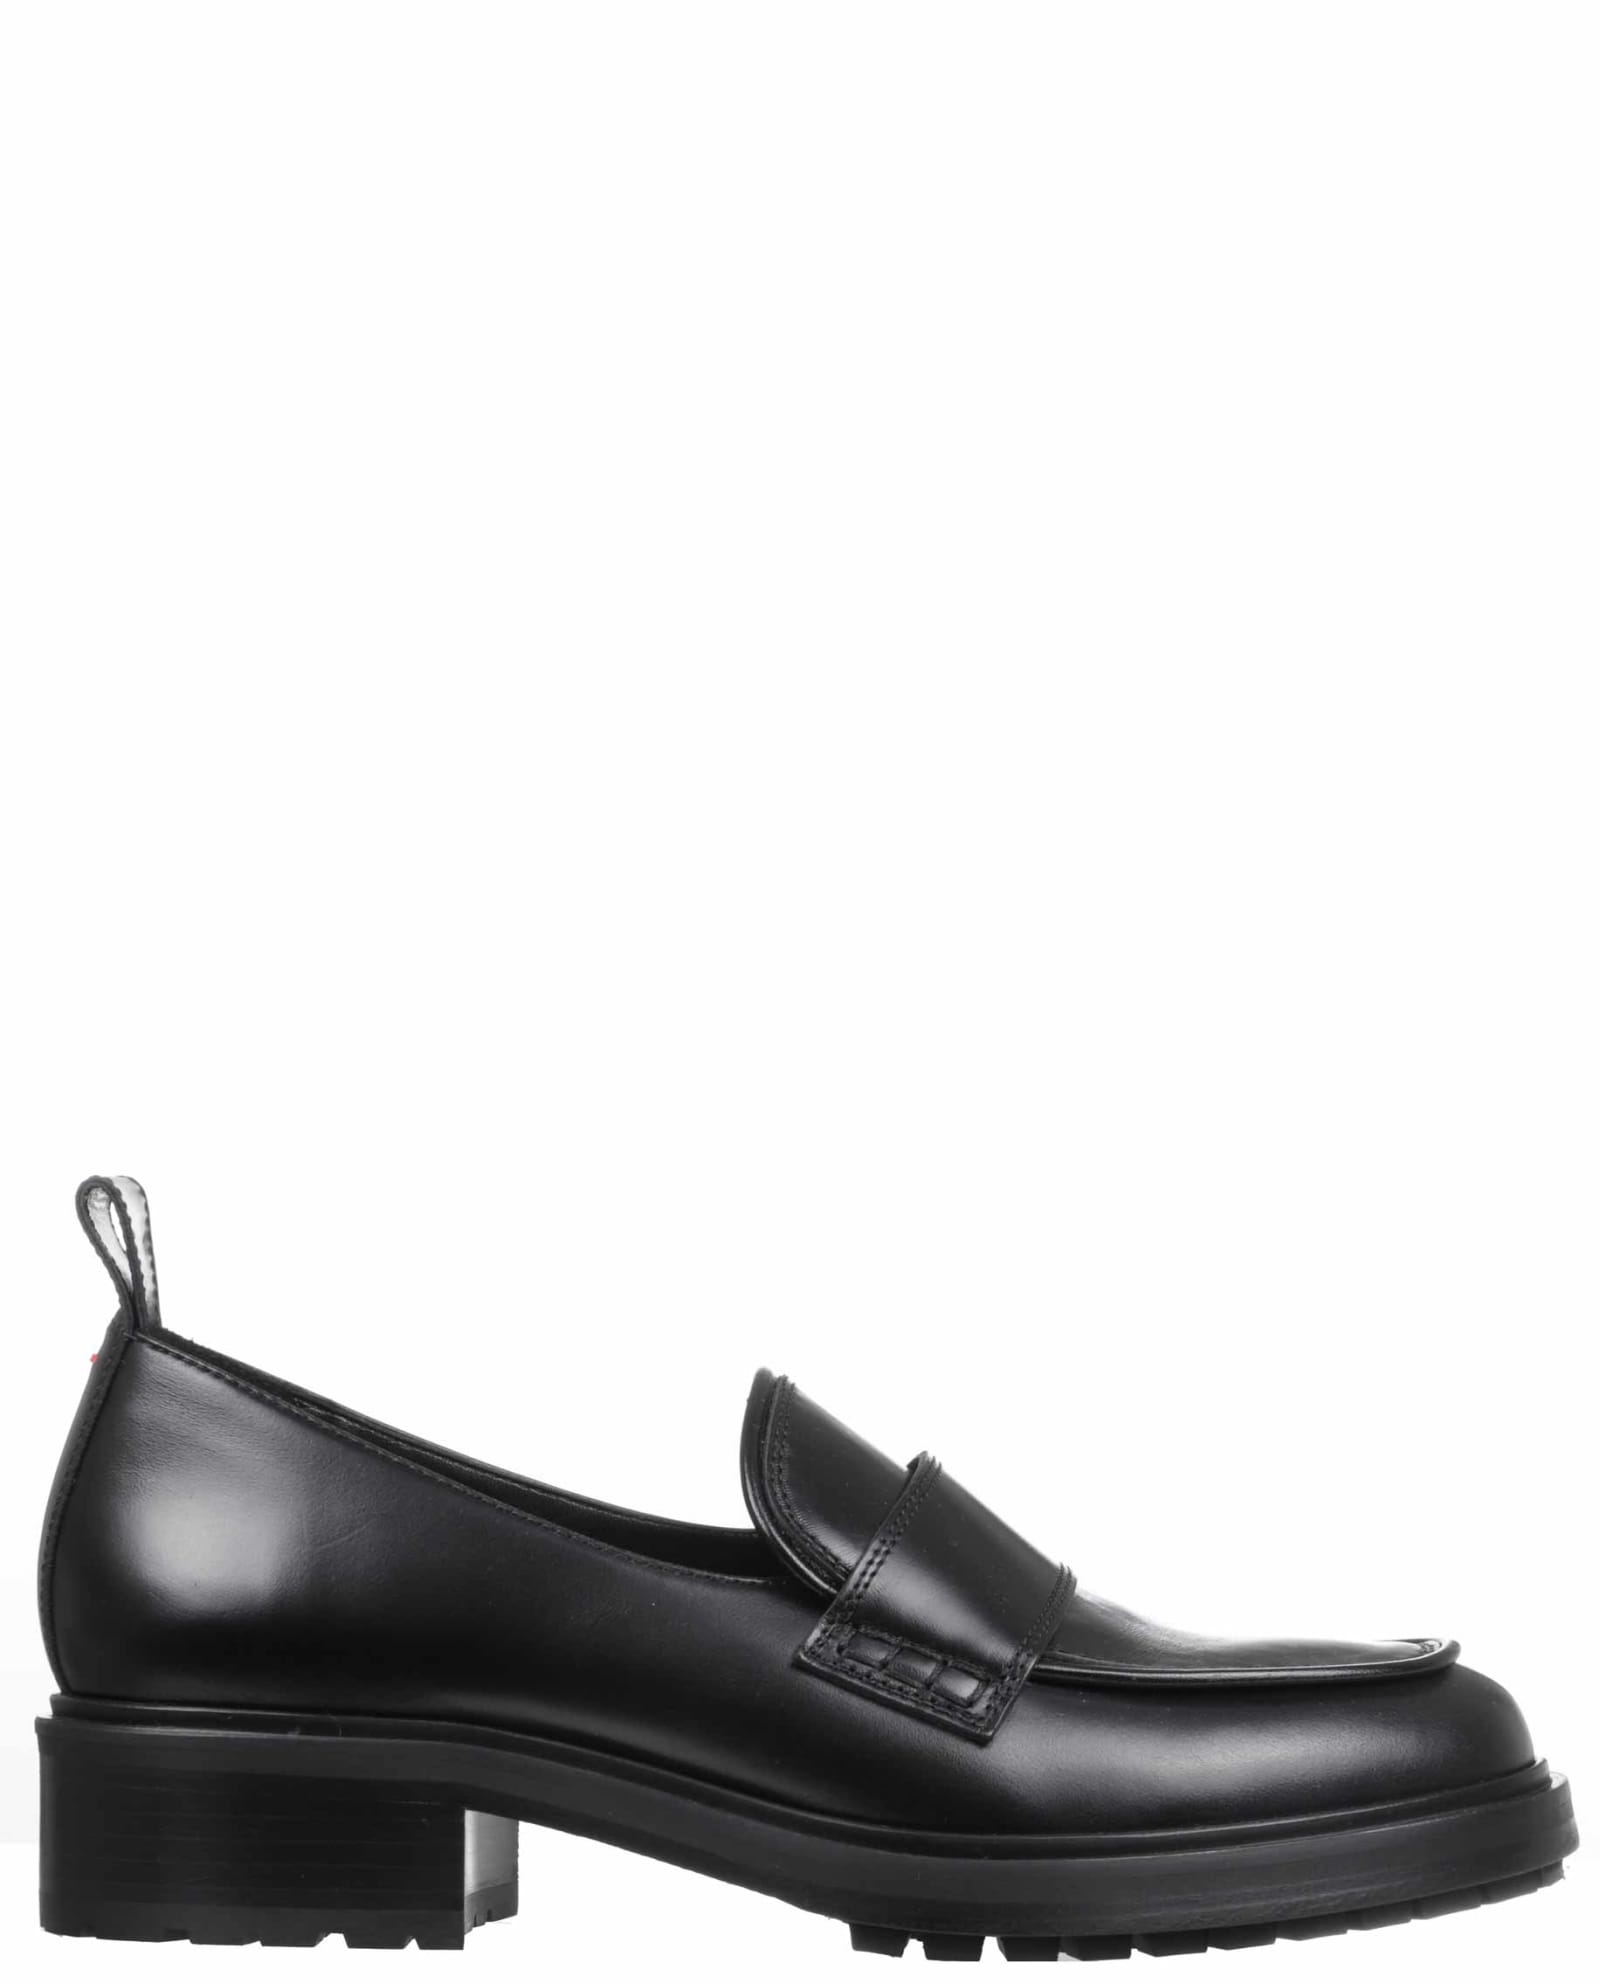 Shop Aeyde Black Ruth Loafers